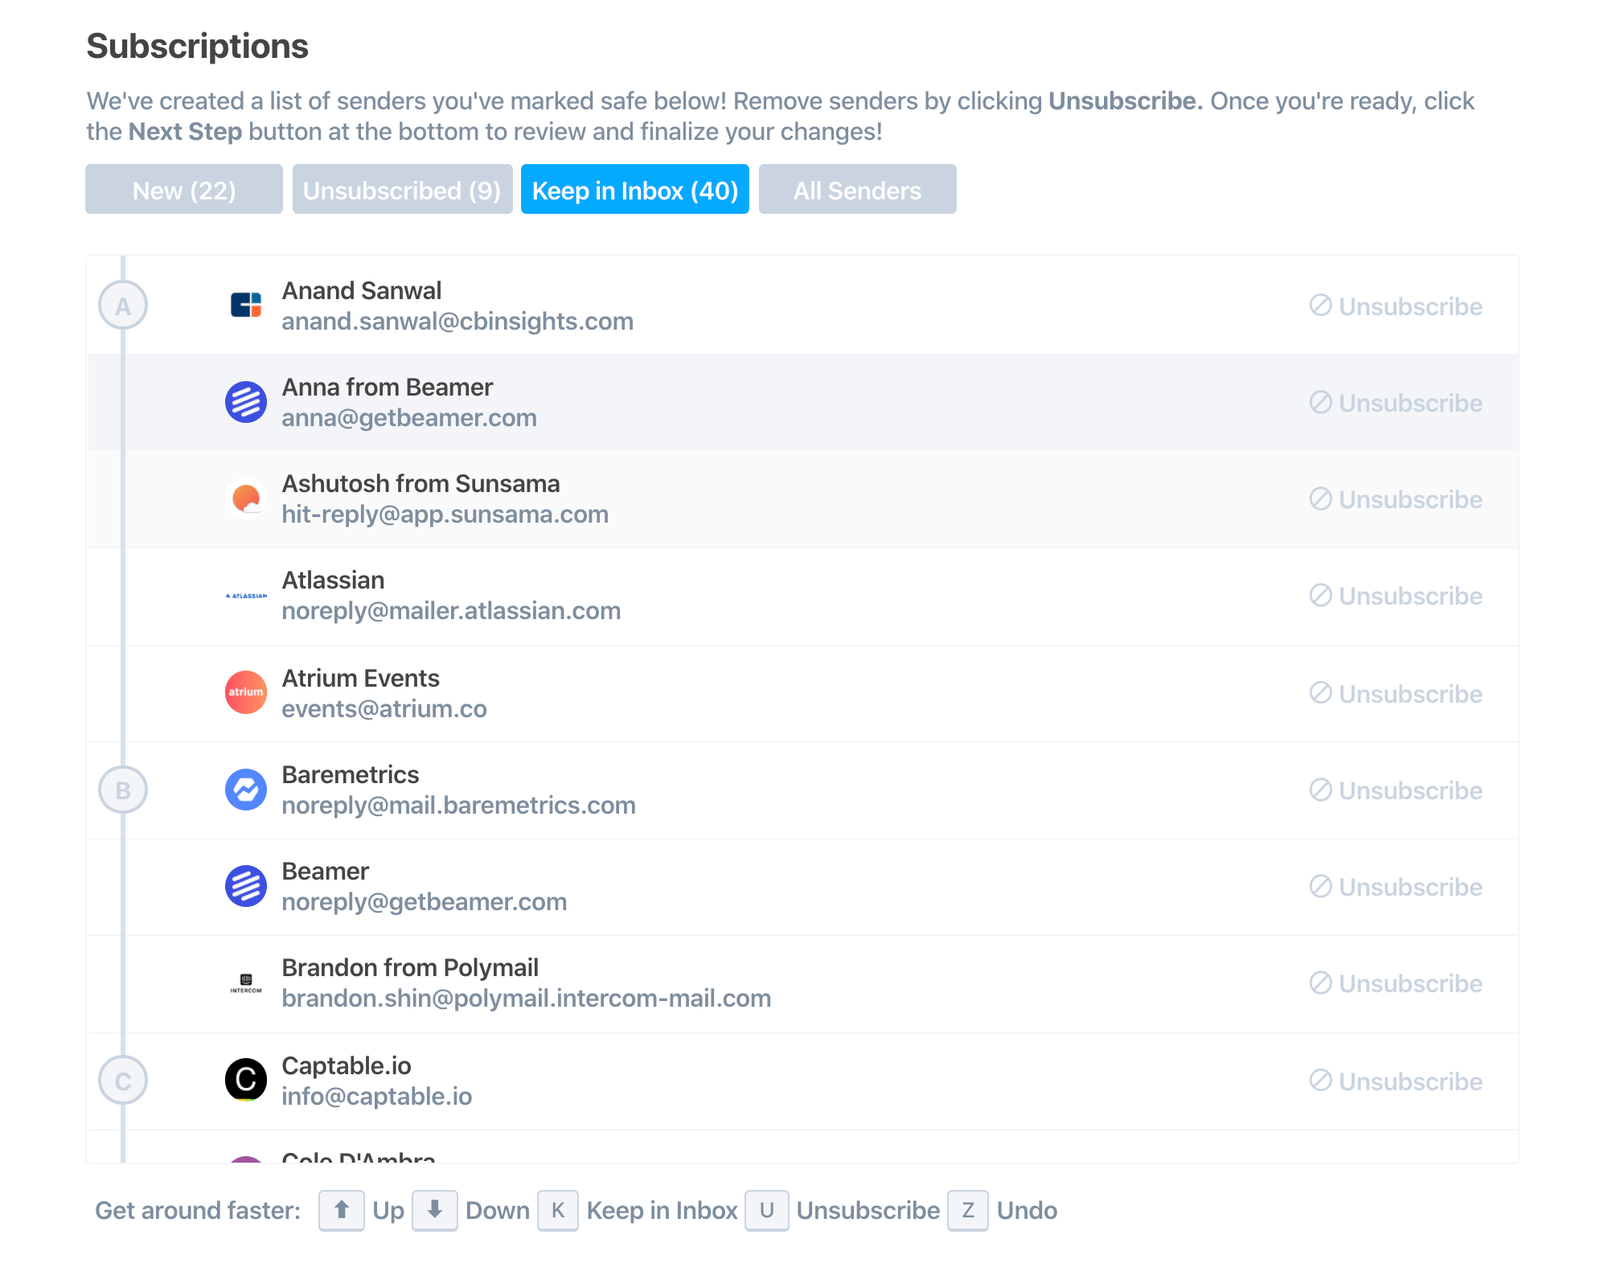 product hunt polymail